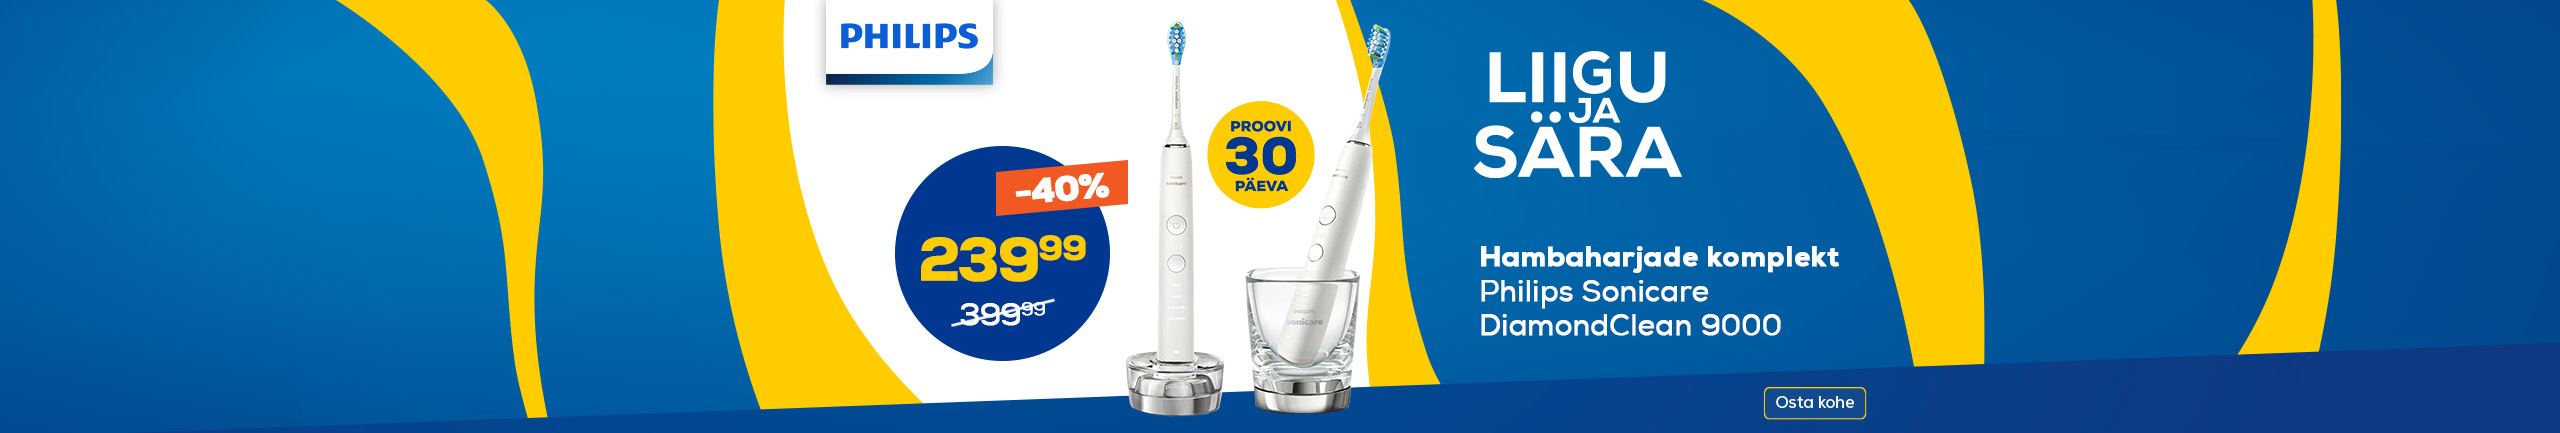 Move and Shine! Philips Sonicare DiamondClean 9000, 2 pcs, white - Electric toothbrush set with app